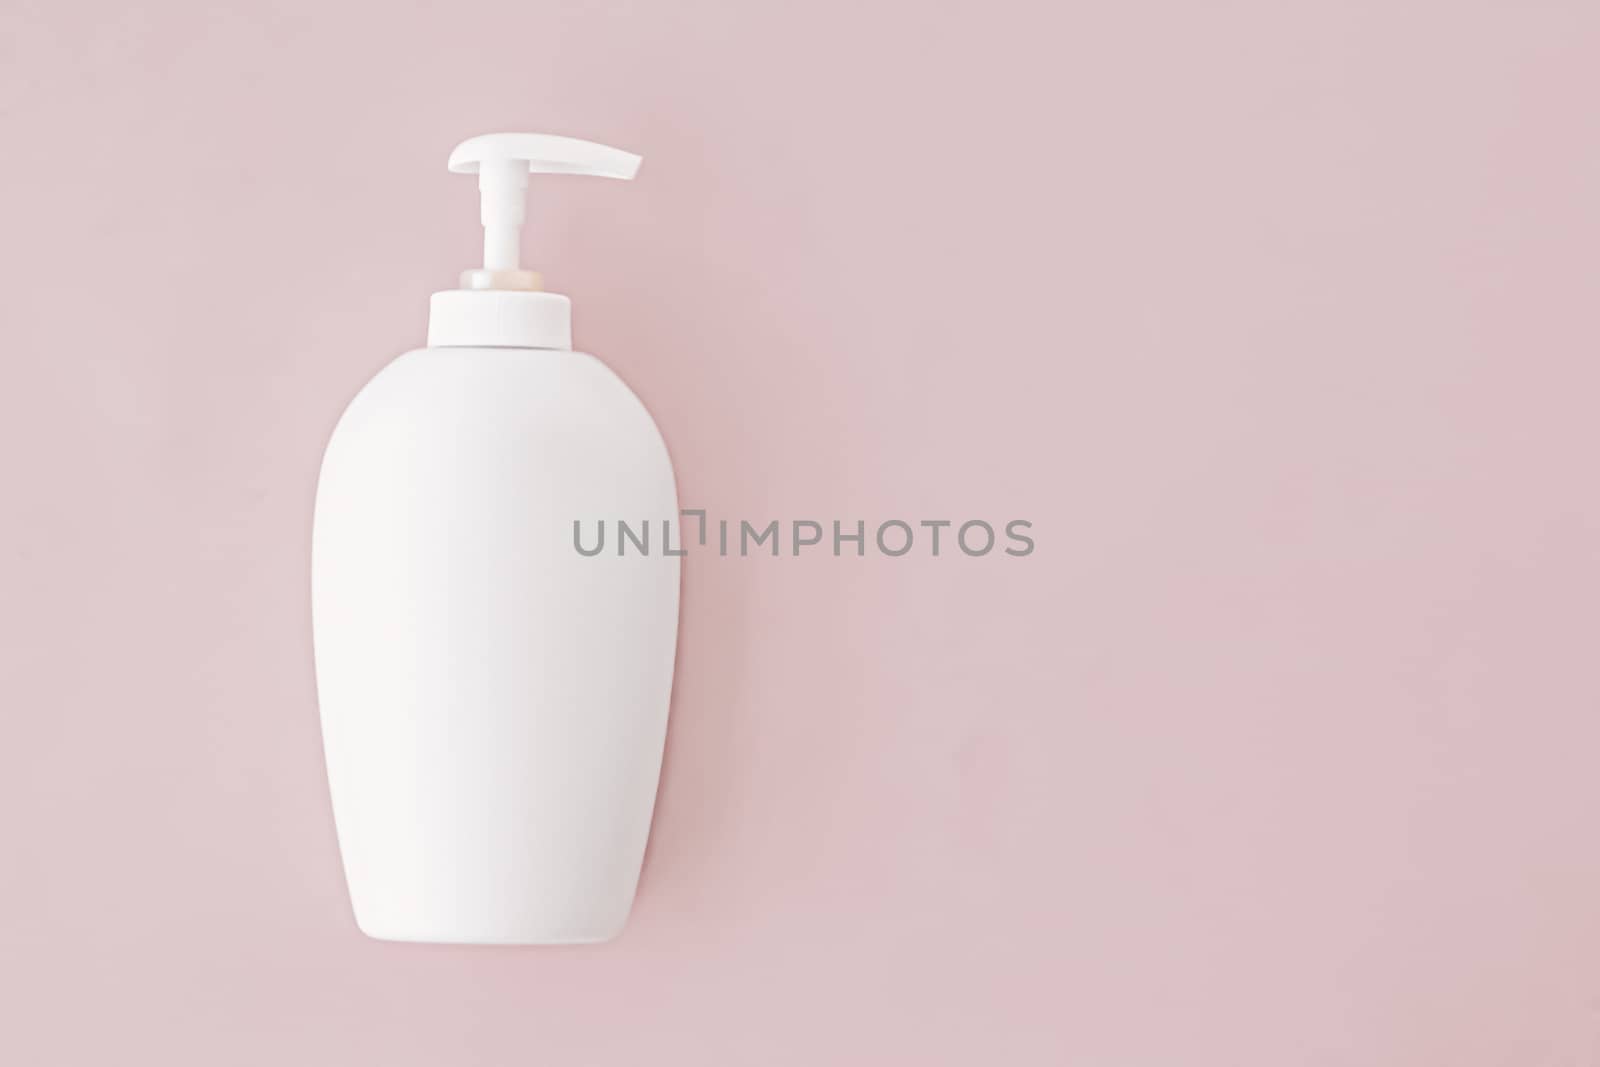 Bottle of antibacterial liquid soap and hand sanitizer on beige background, hygiene product and health care by Anneleven